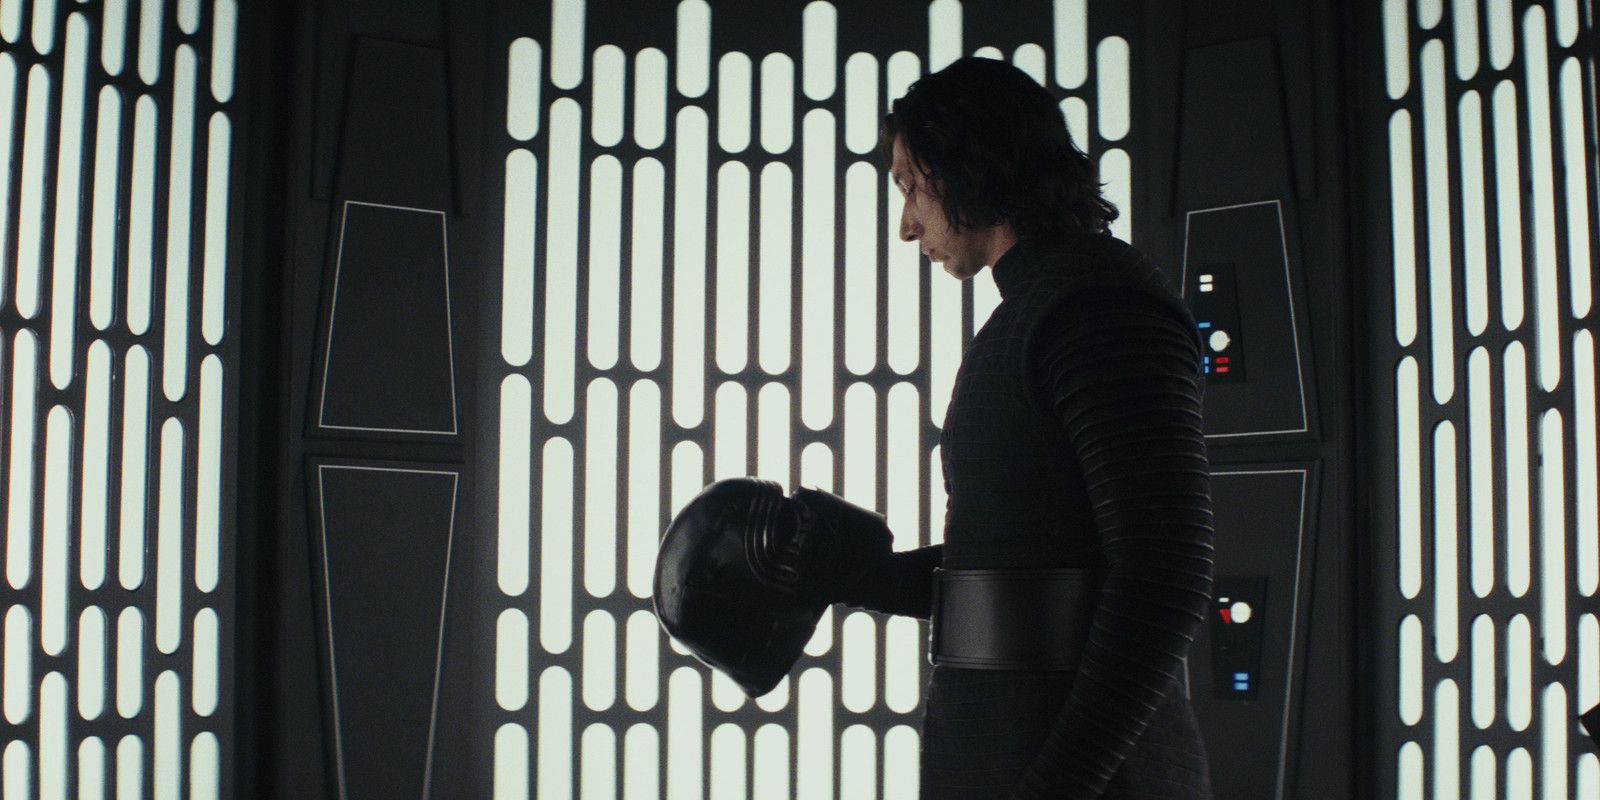 Why You're Wrong About Kylo Ren's "Let The Past Die" Last Jedi Line